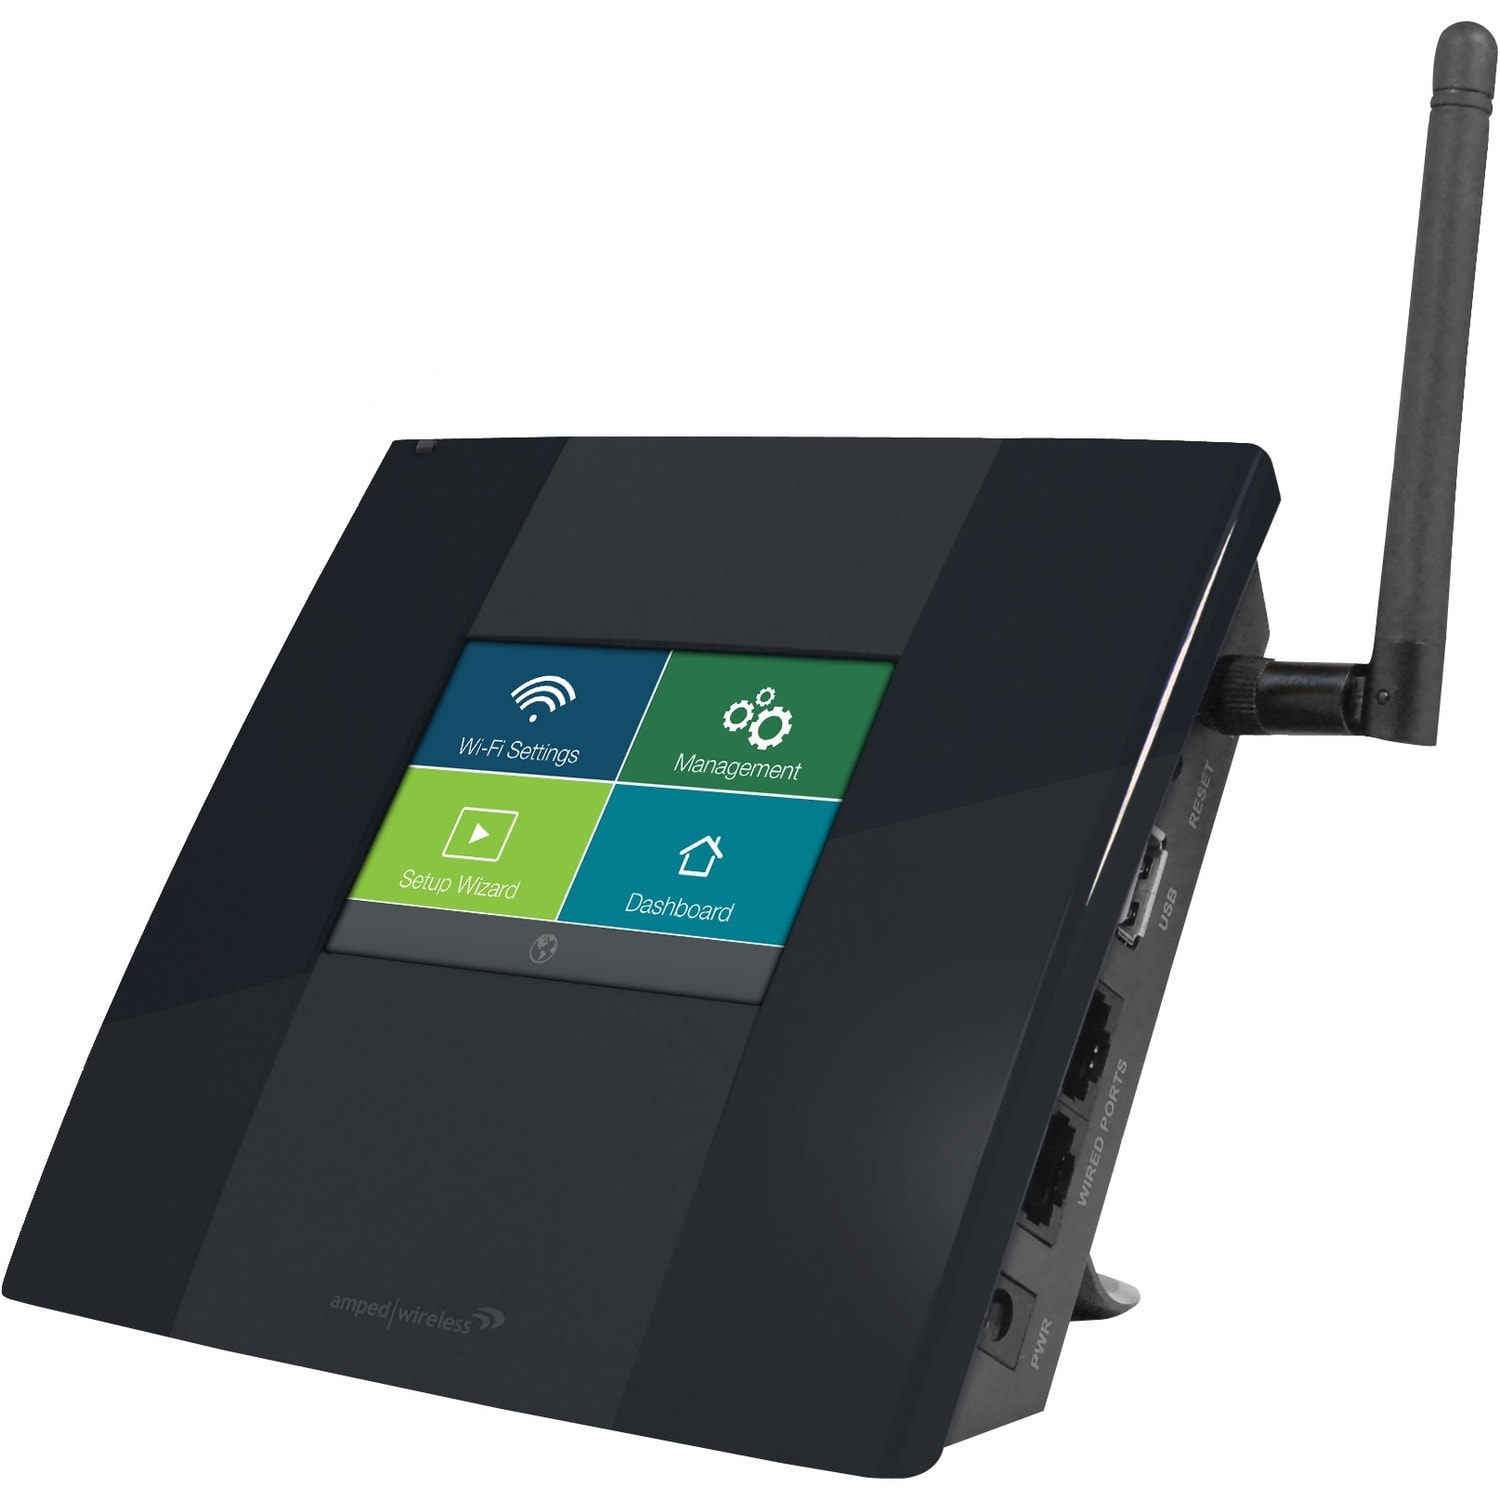 Best Buy Amped Wireless High Power Wireless N 600mw Smart Repeater And Range Extender Sr10000